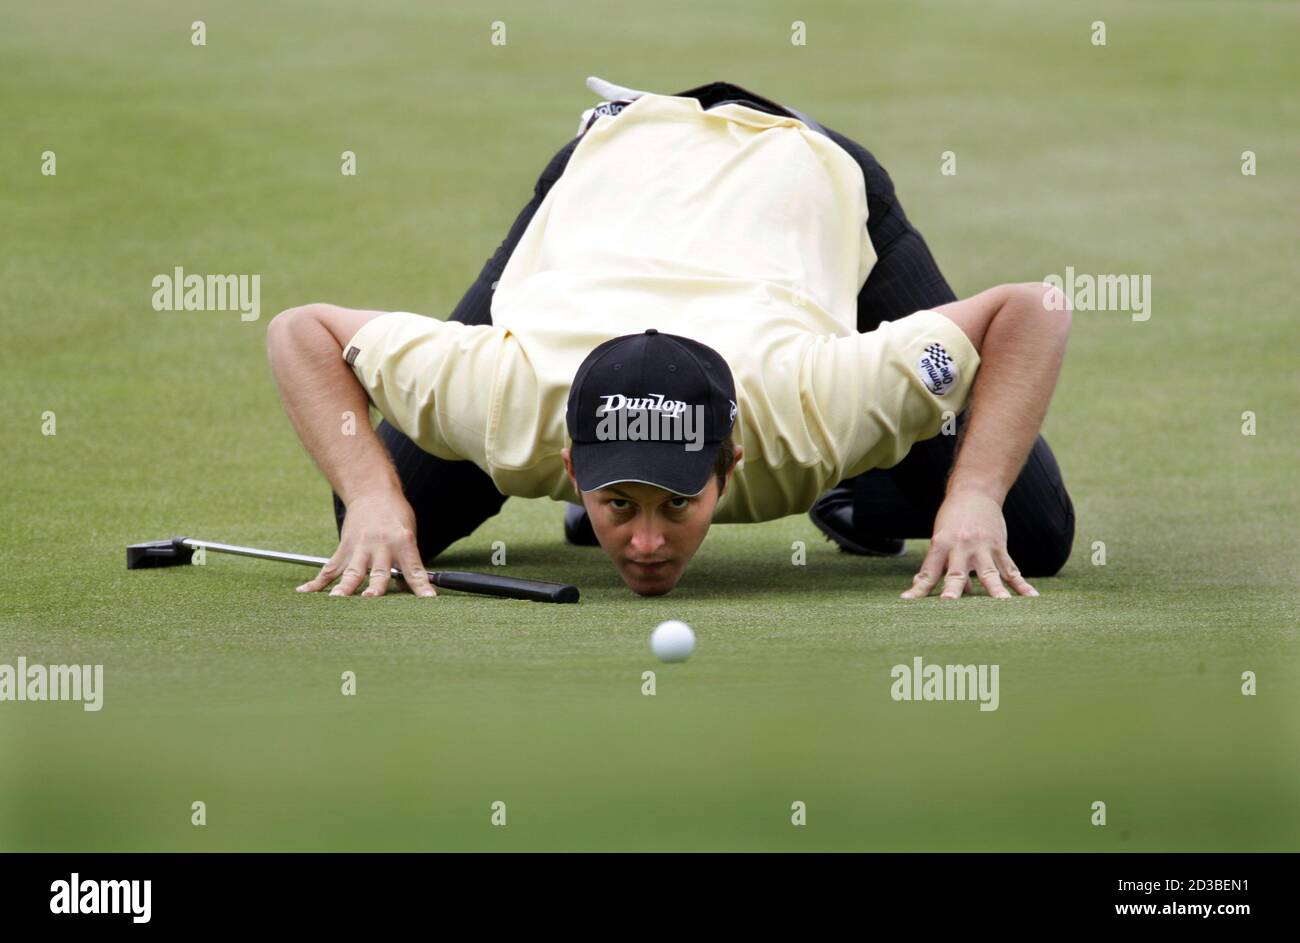 Stuart Manley of Wales prepares to putt on the Aa Saint-Omer Golf course  during the first day of the Saint-Omer Open. Stuart Manley of Wales  prepares to putt on the Aa Saint-Omer